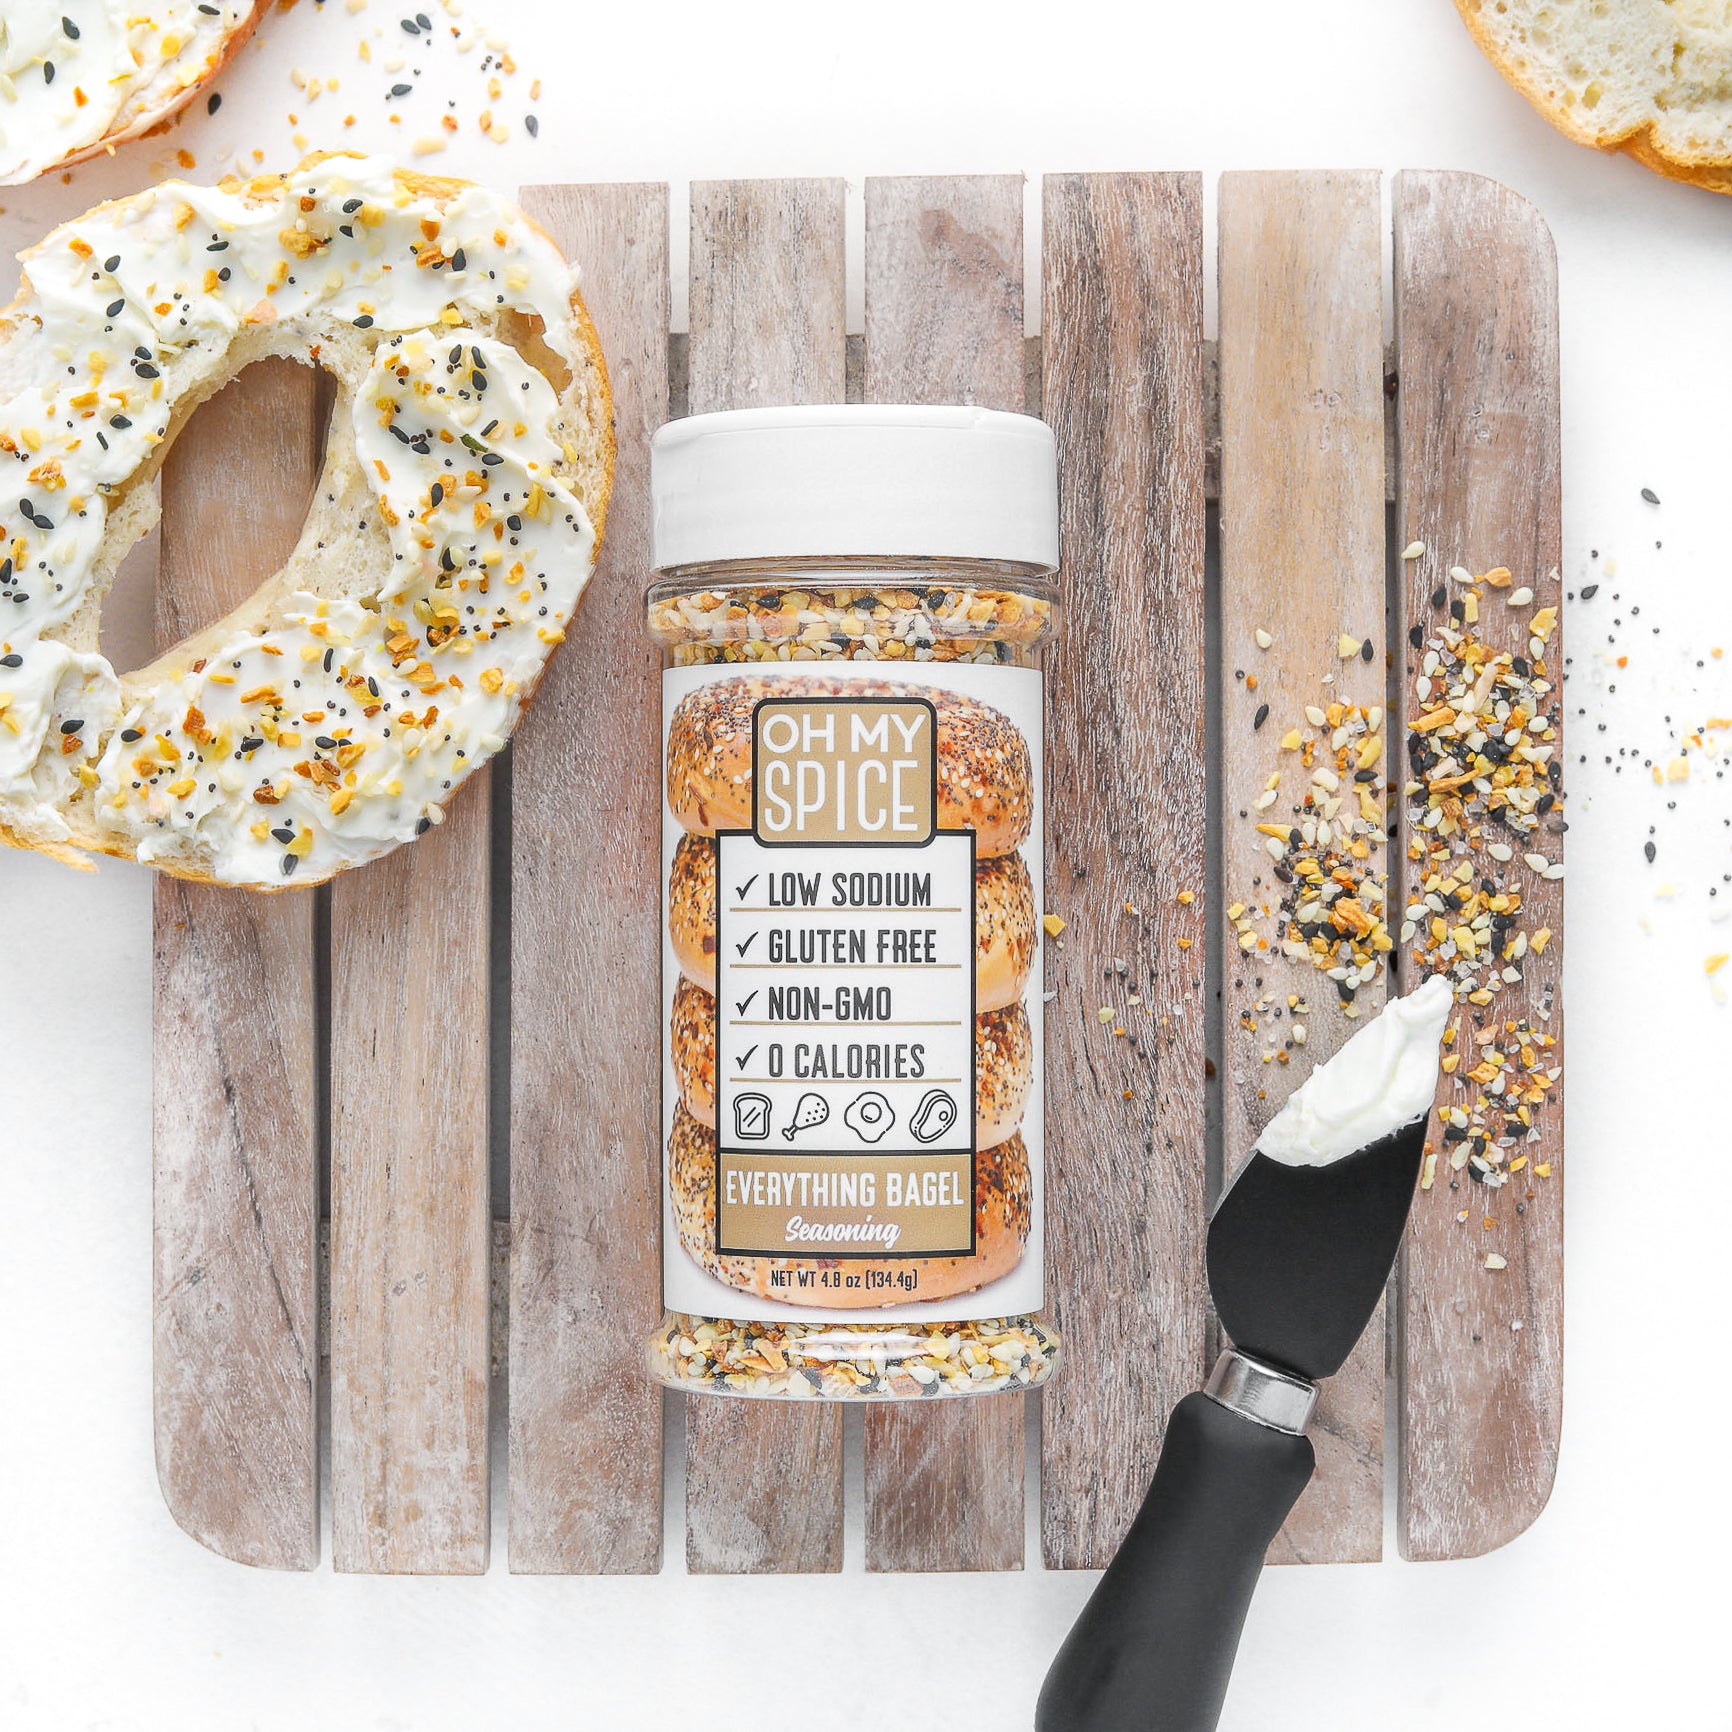 Crystal Grains debutes in spice market with brand 'chef's choice